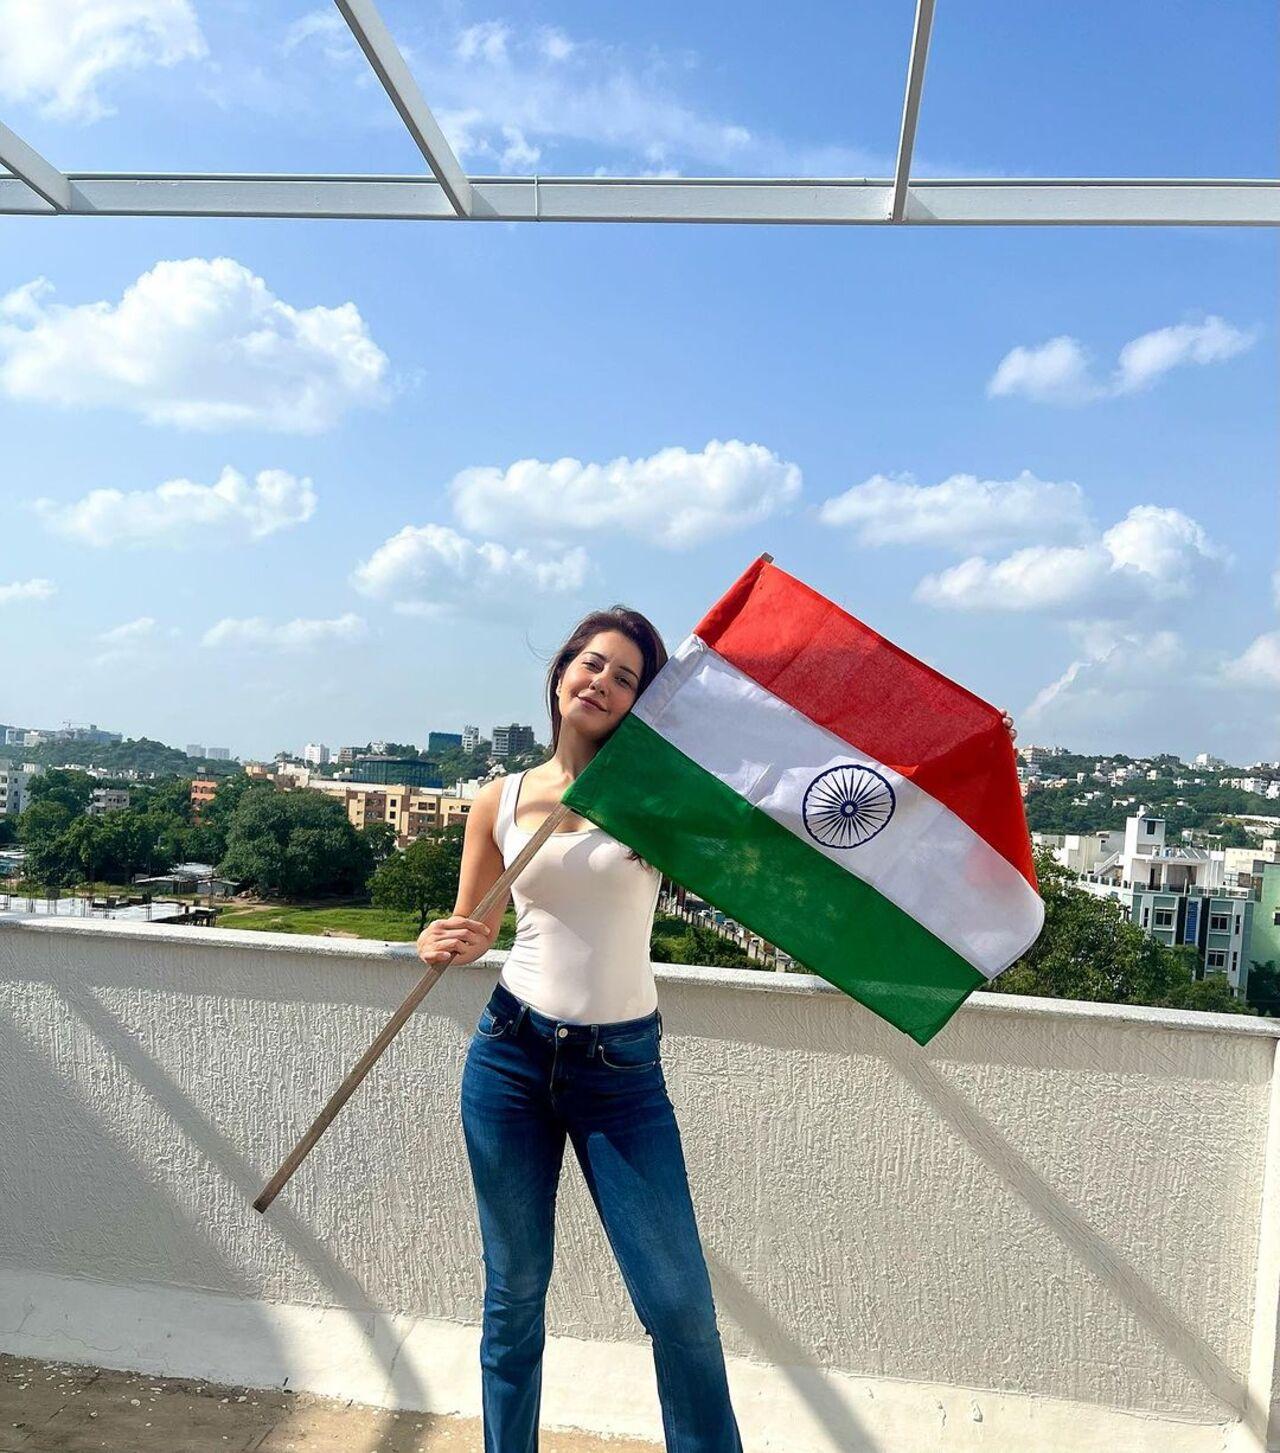 Actess Raashii Khanna took to her Instagram handle to share herself holding the Indian flag at waving it while standing on a terrace